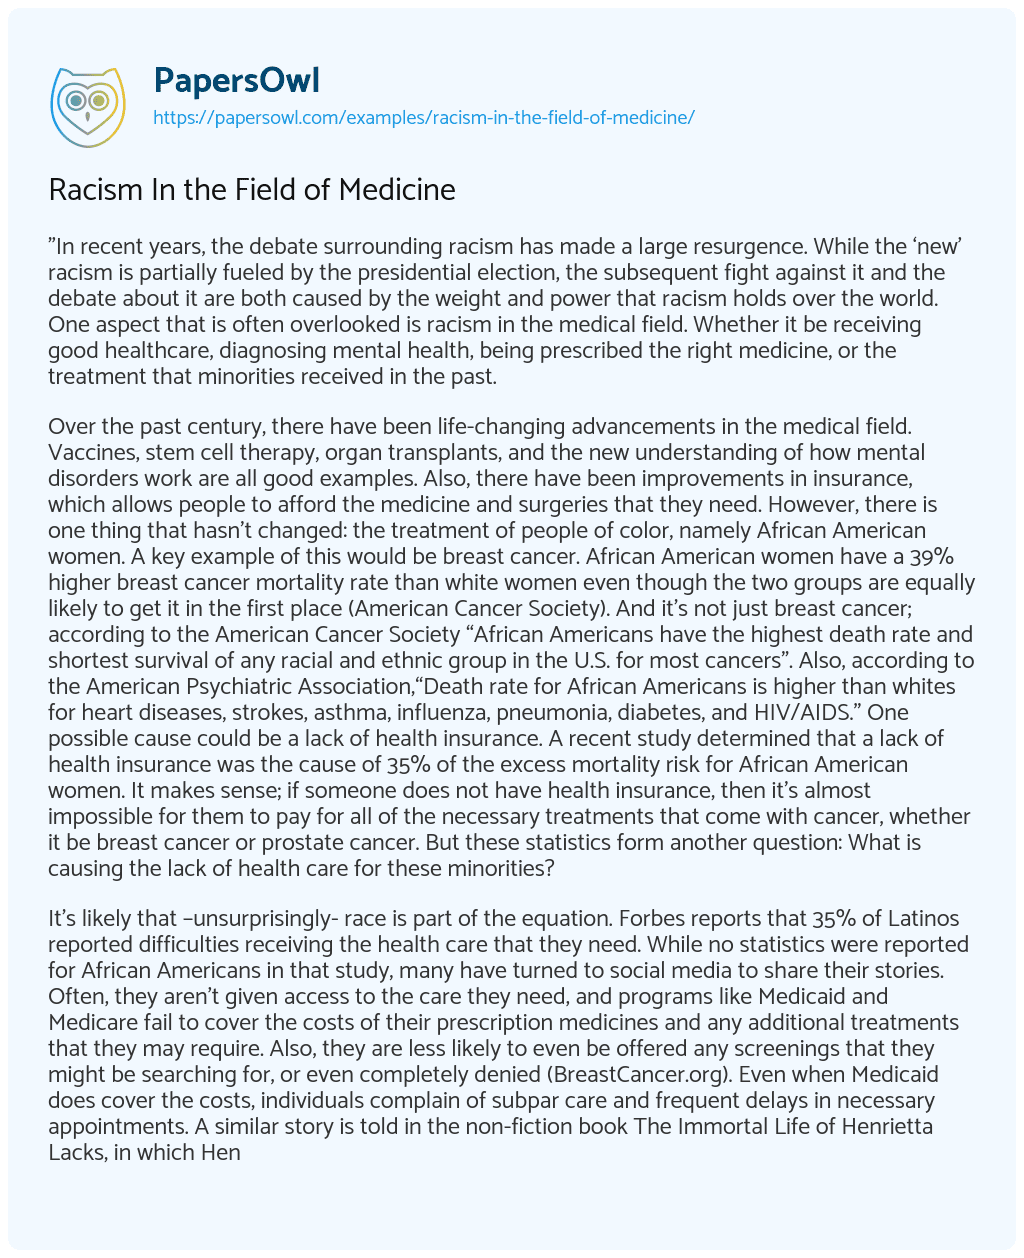 Essay on Racism in the Field of Medicine